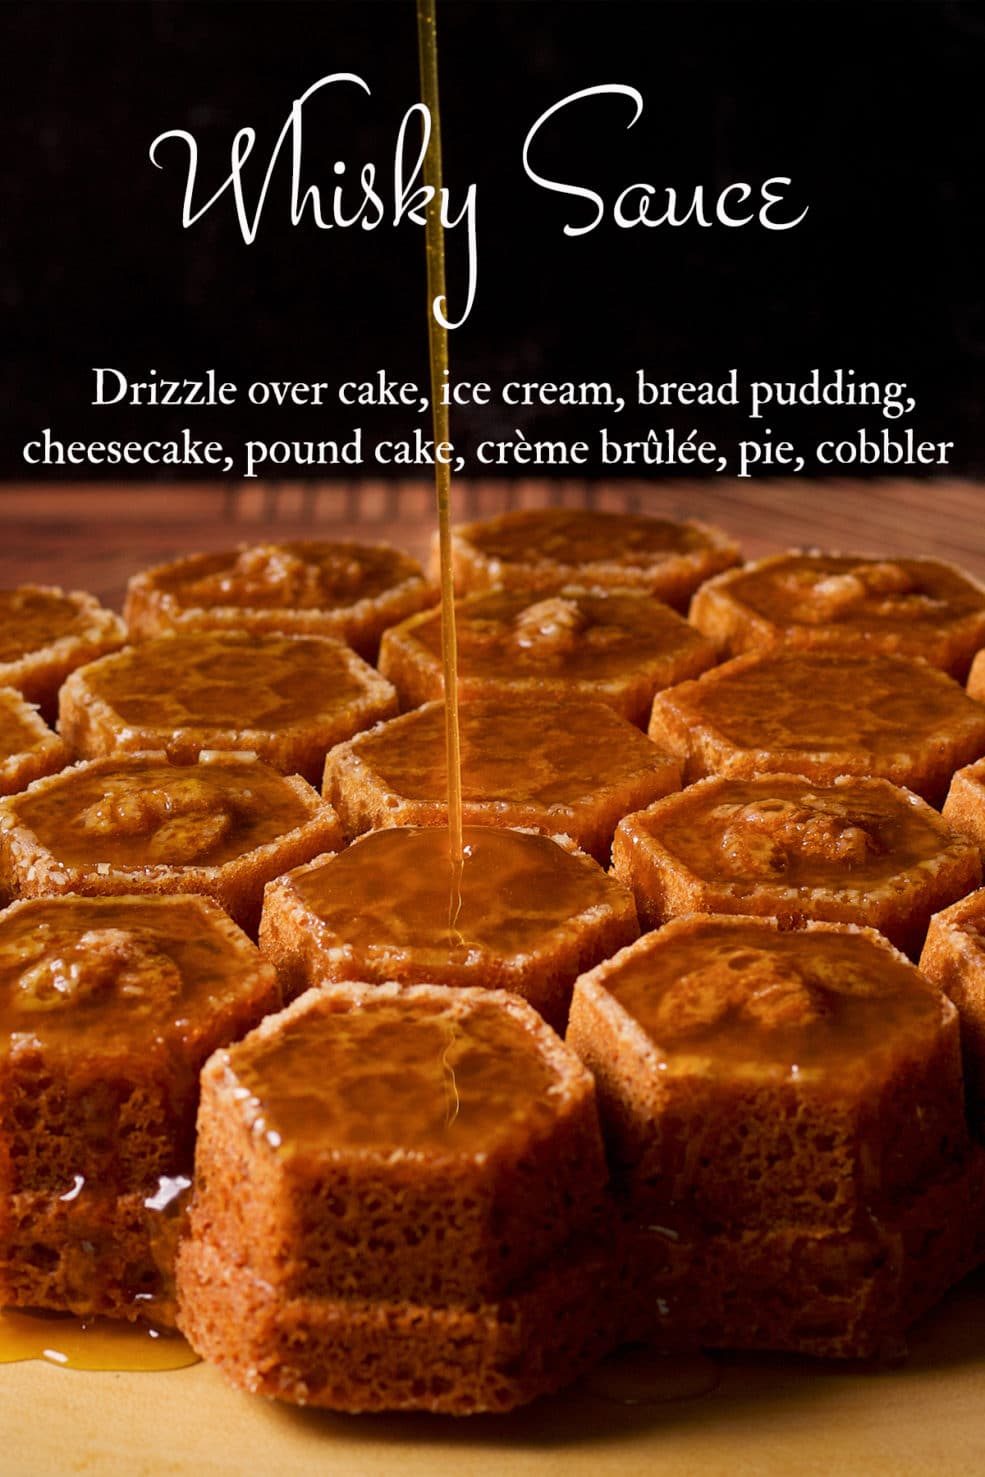 Drizzling whisky sauce over the top of a honey cake.